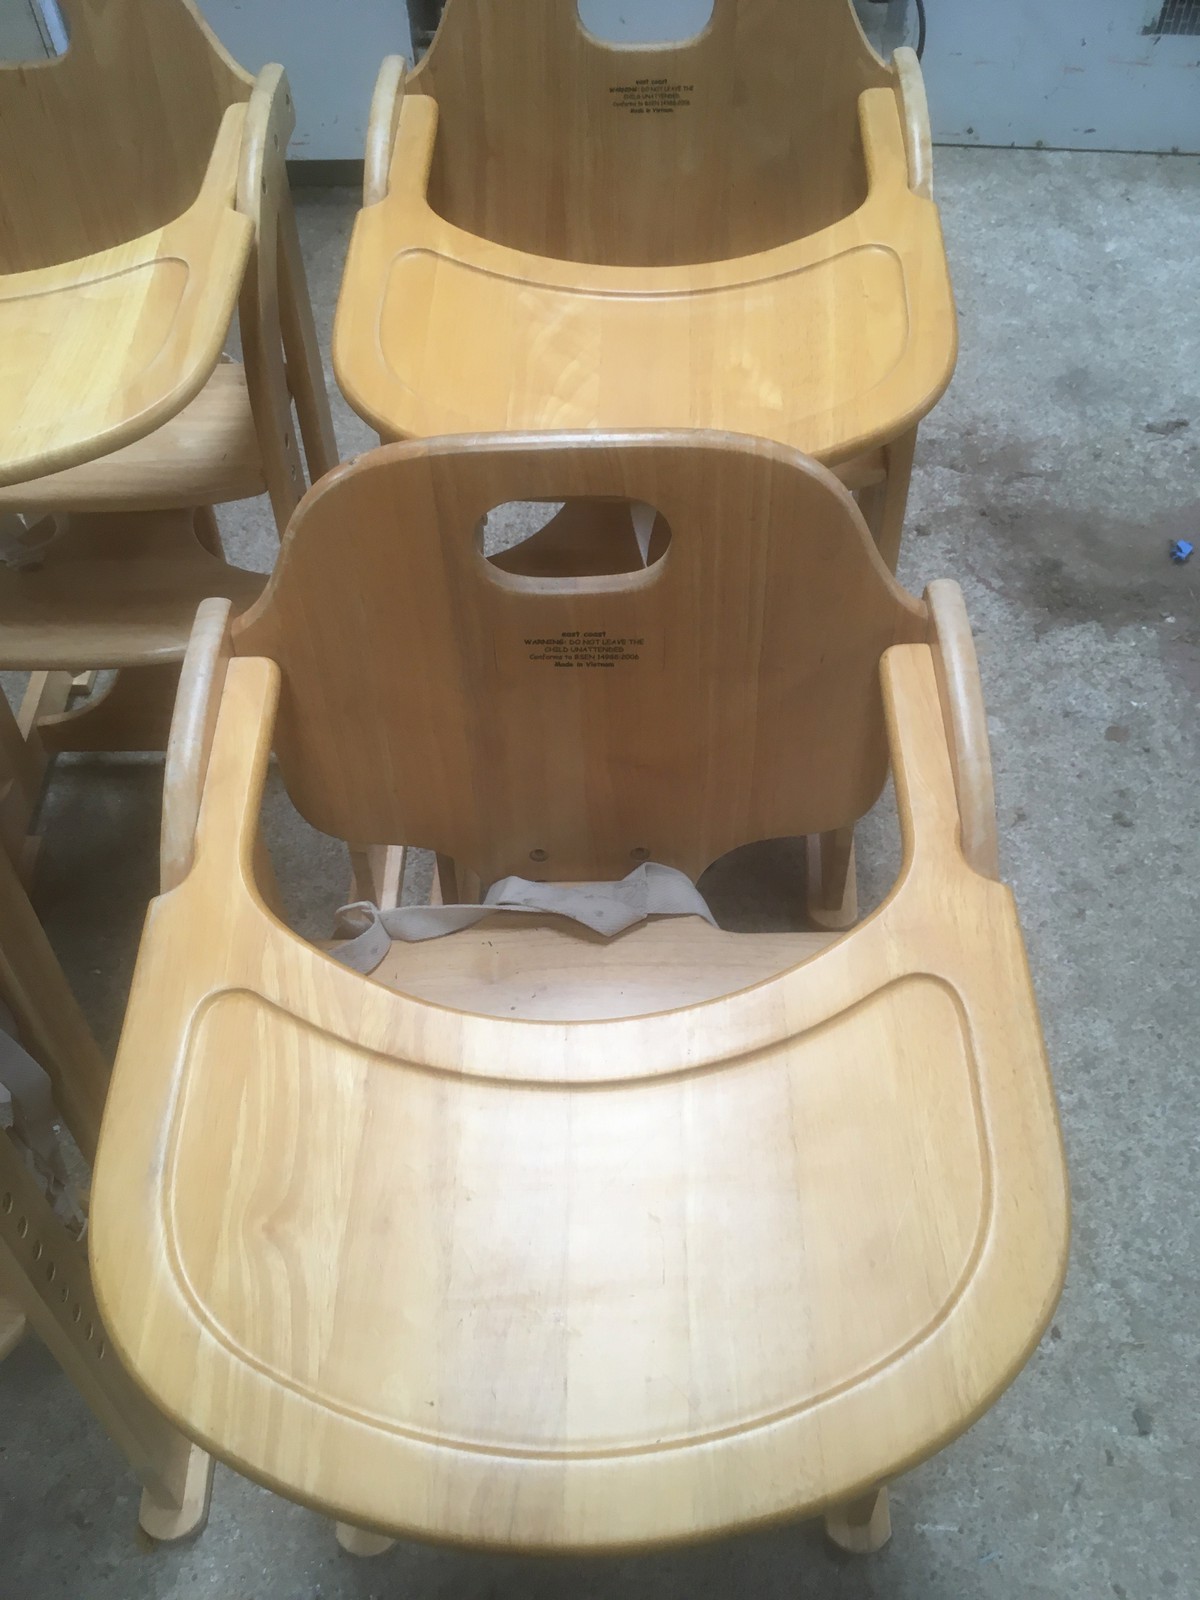 Secondhand Pub Equipment | High Chairs for Baby | 4x Wooden Highchairs